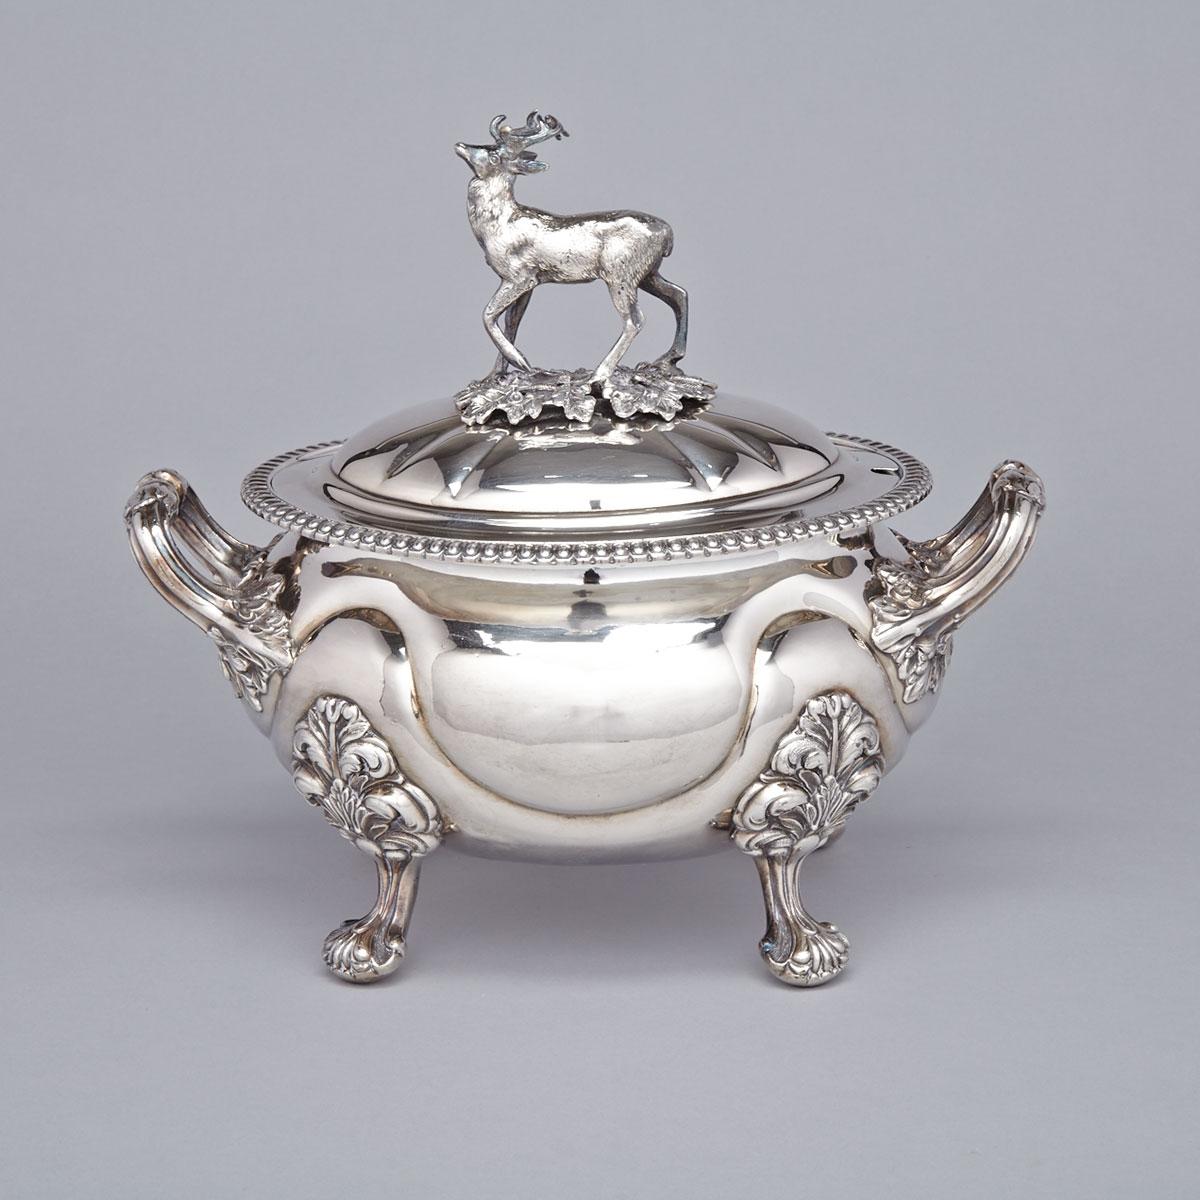 Victorian Silver Plated Oval Soup Tureen, mid-19th century